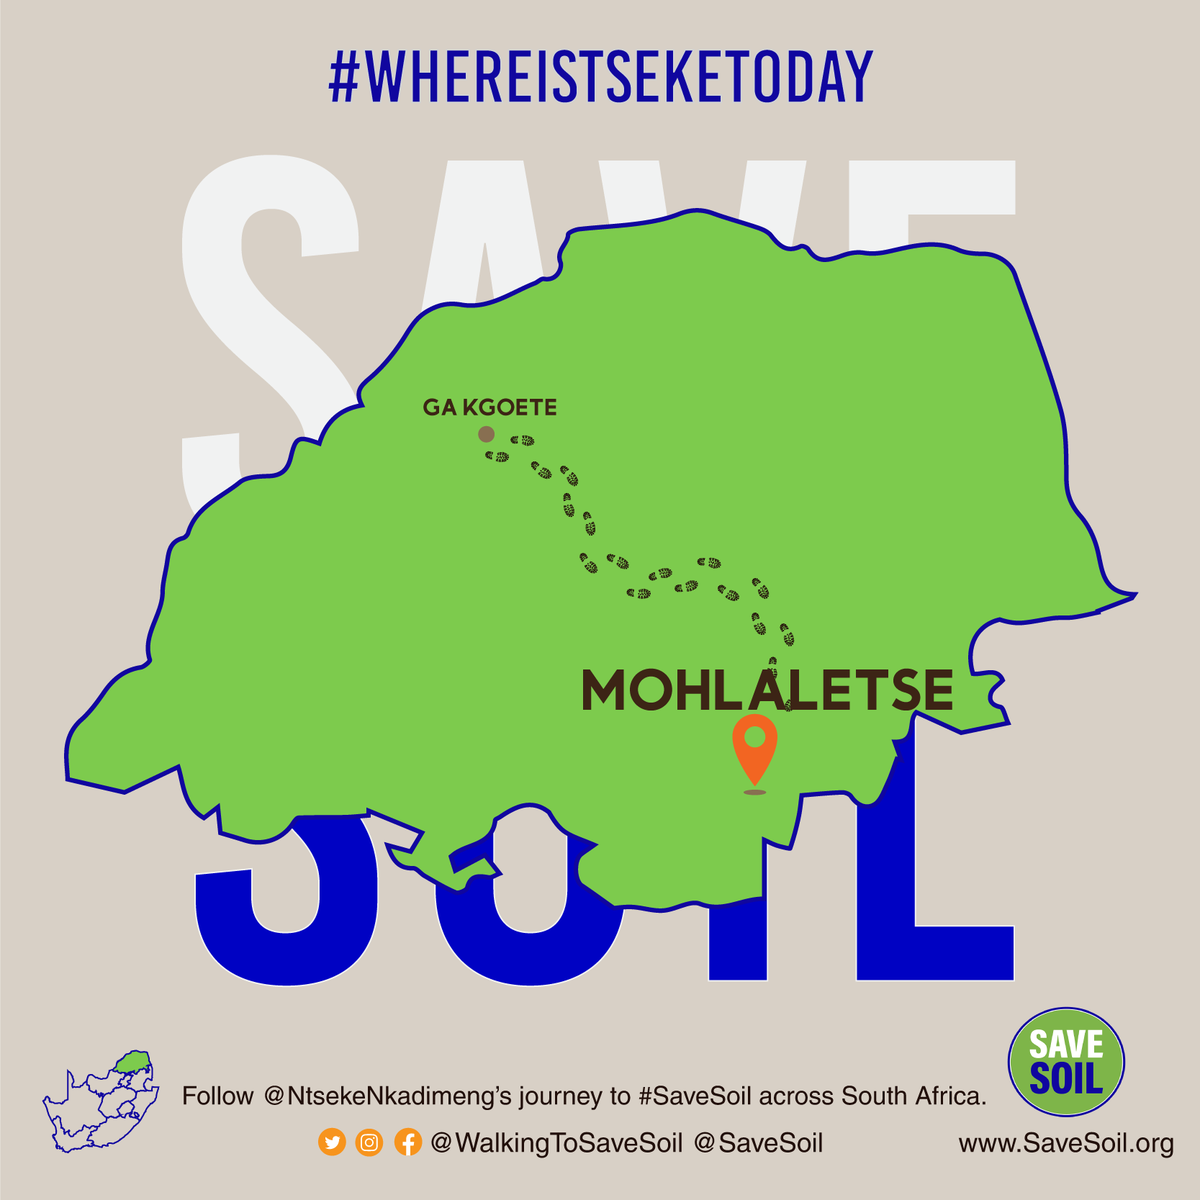 Today I will be making my way to Mohlaletse, it will be a long journey, but definitely a memorable one. Help me spread the word #savesoil #SaveSoilMovement #whereistseketoday